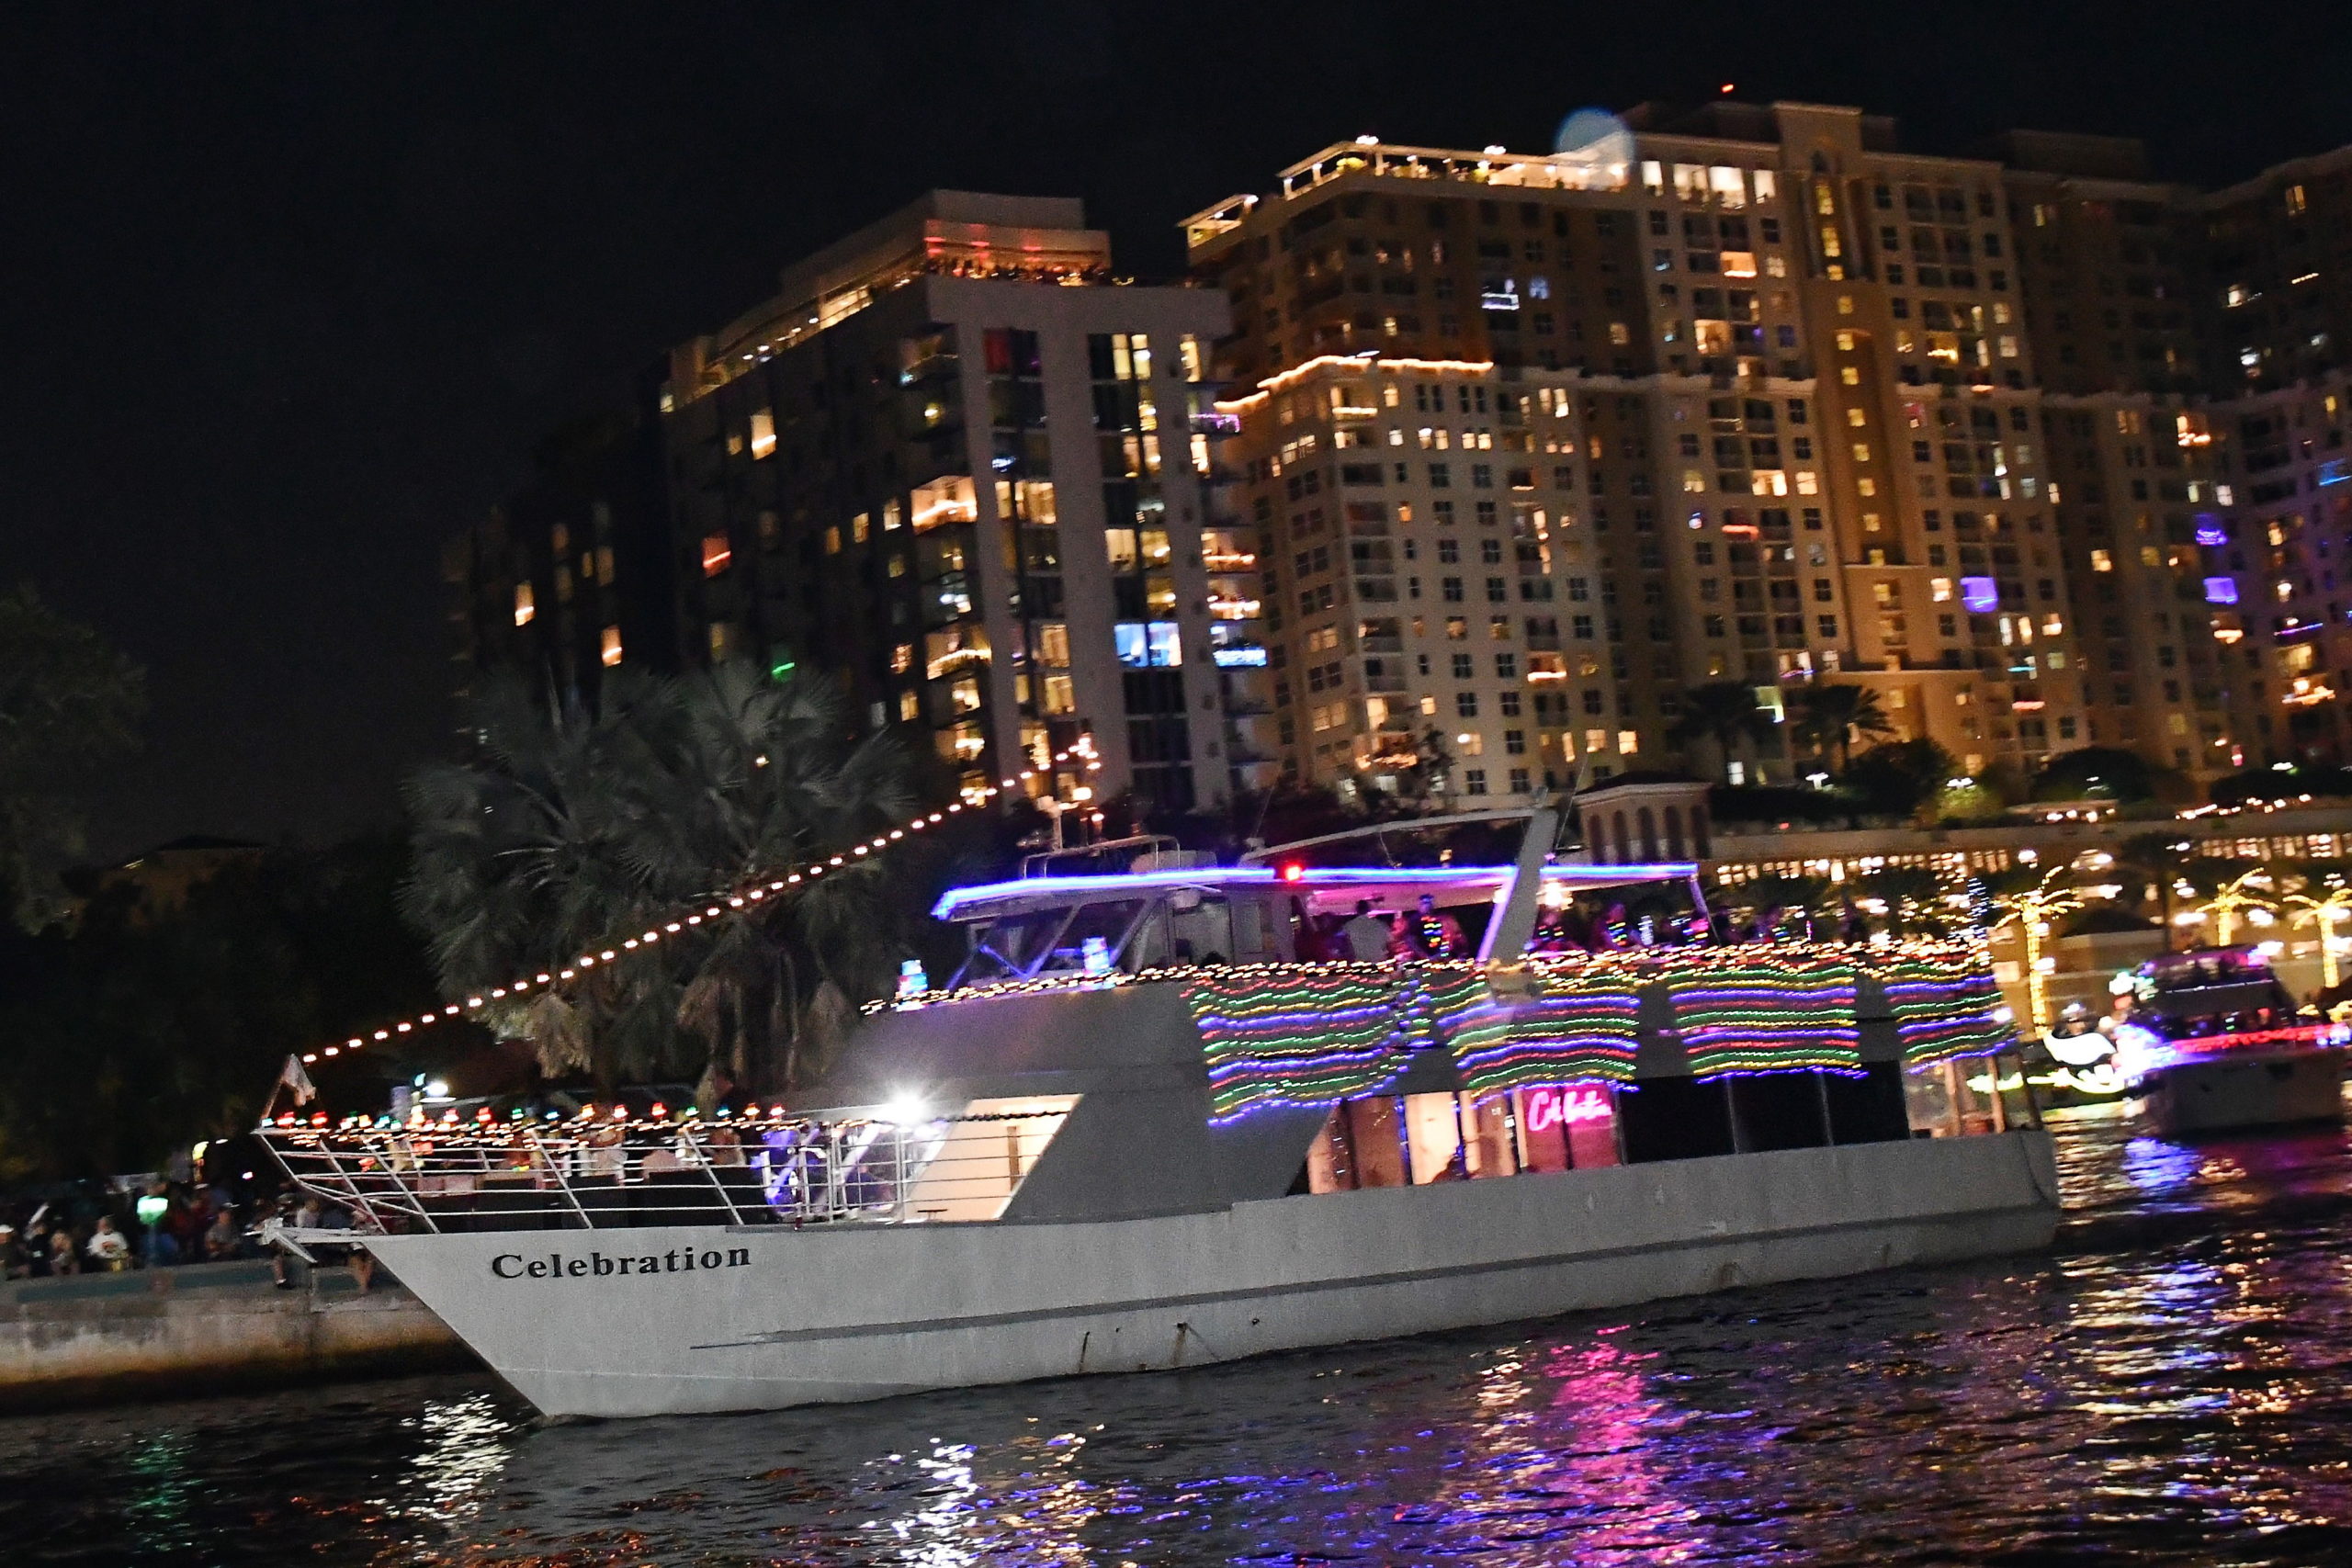 Insight, HP, Intel And Microsoft aboard Celebration, boat number 22 in the 2022 Winterfest Boat Parade